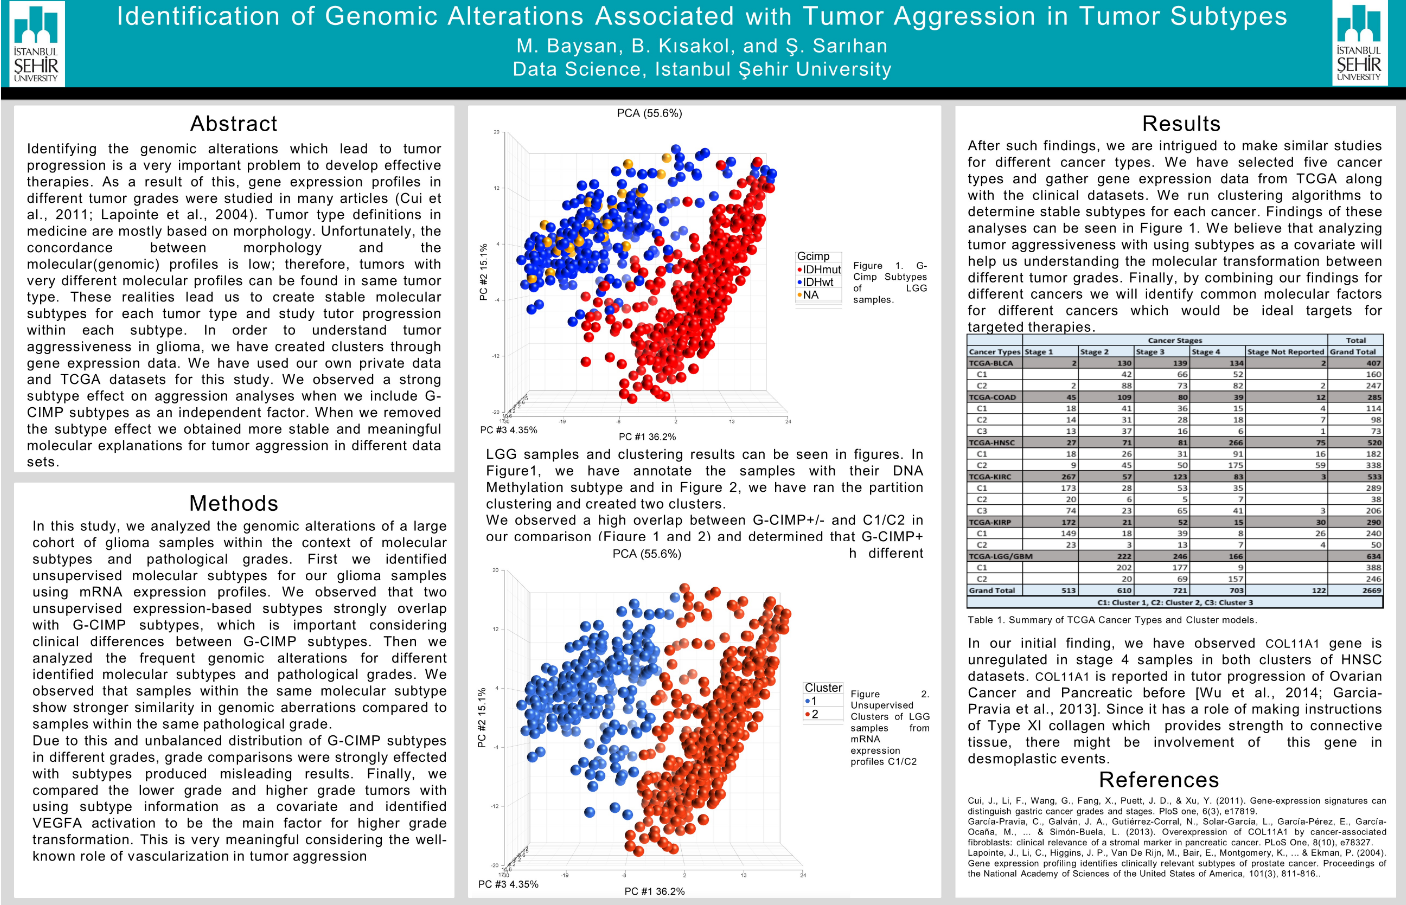 Identification of Genomic Alterations Associated with Tumor Aggression in Tumor Subtypes